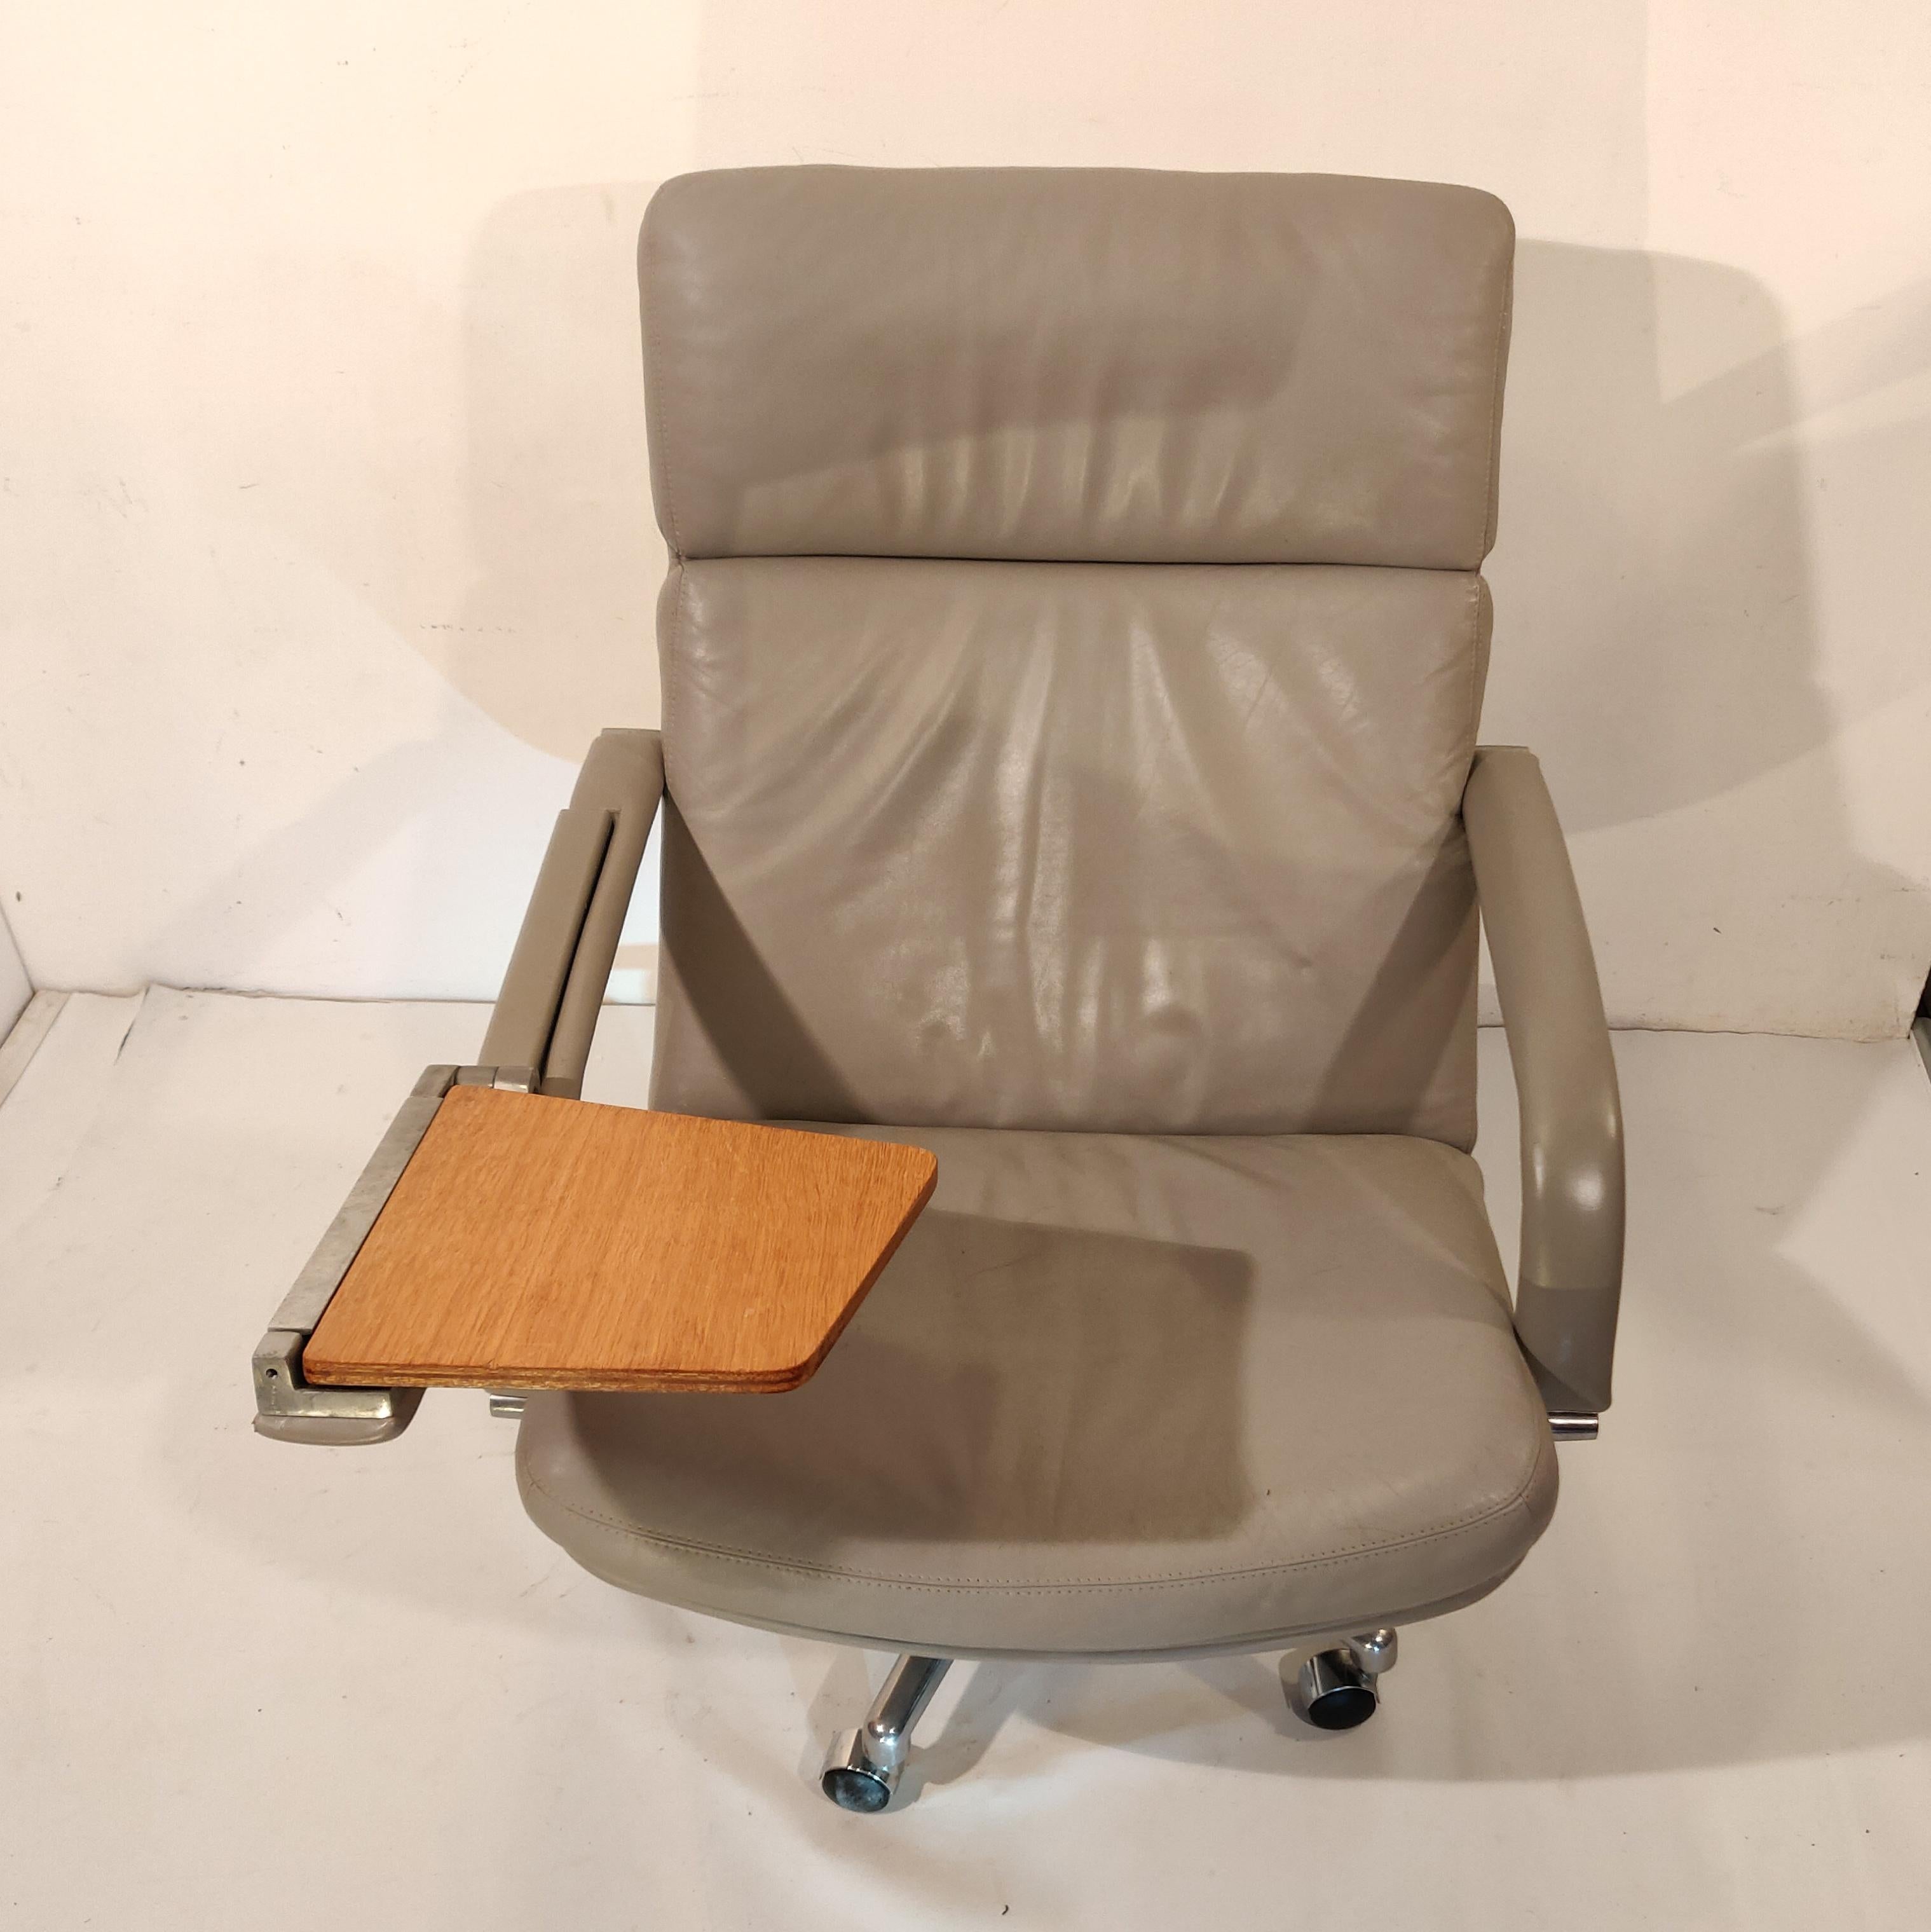 Leather Swivel Chair with Wooden Writing Board by Geoffrey Harcourt, 1970s For Sale 4